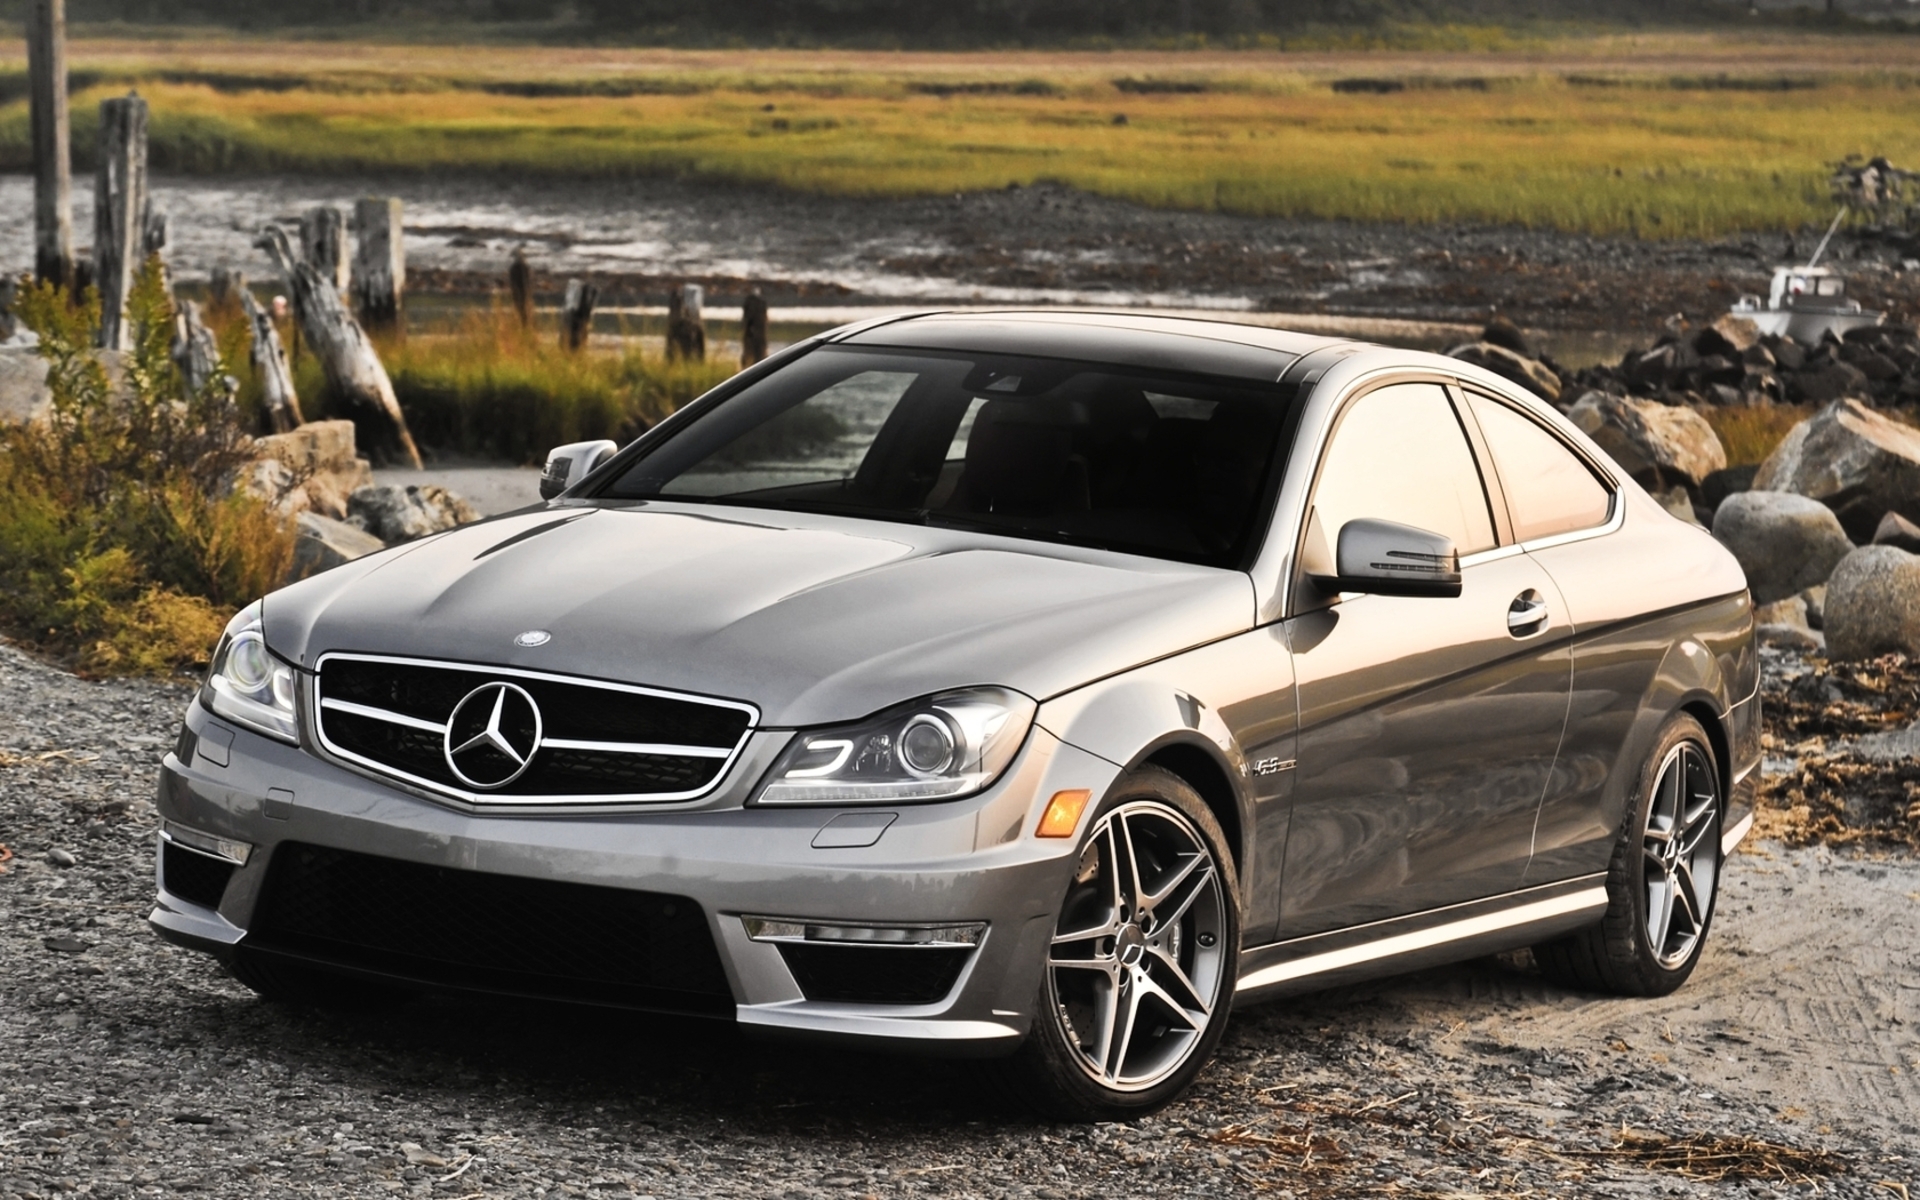 Mercedes-Benz HD Wallpaper | Background Image | 1920x1200 | ID:367011 - Wallpaper Abyss